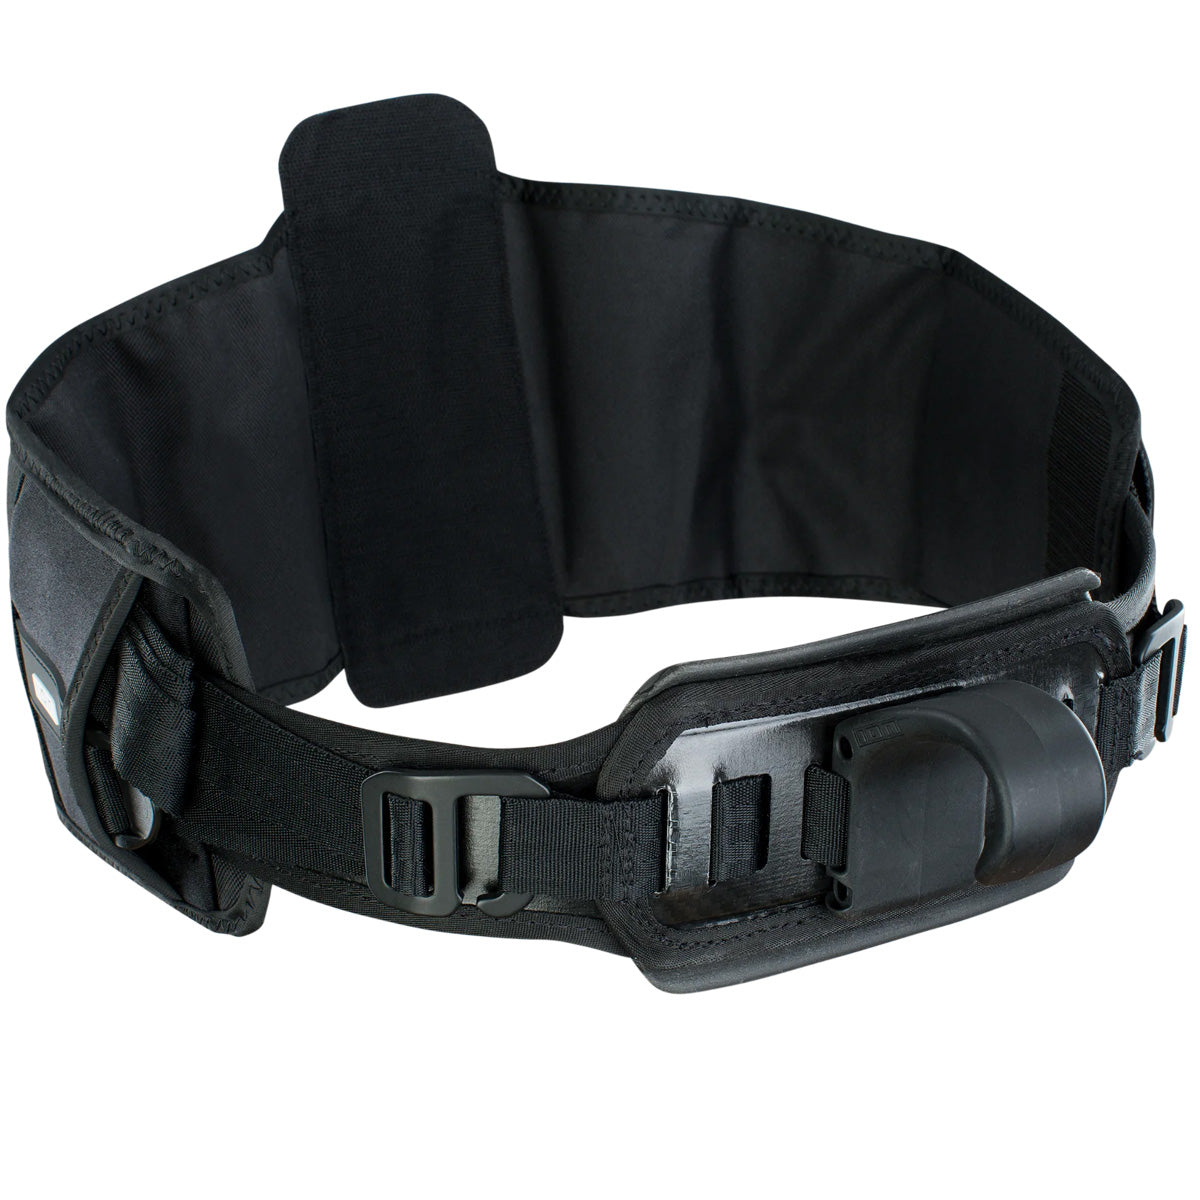 ION Rush Foil Wing Impact Vest Harness - SUP